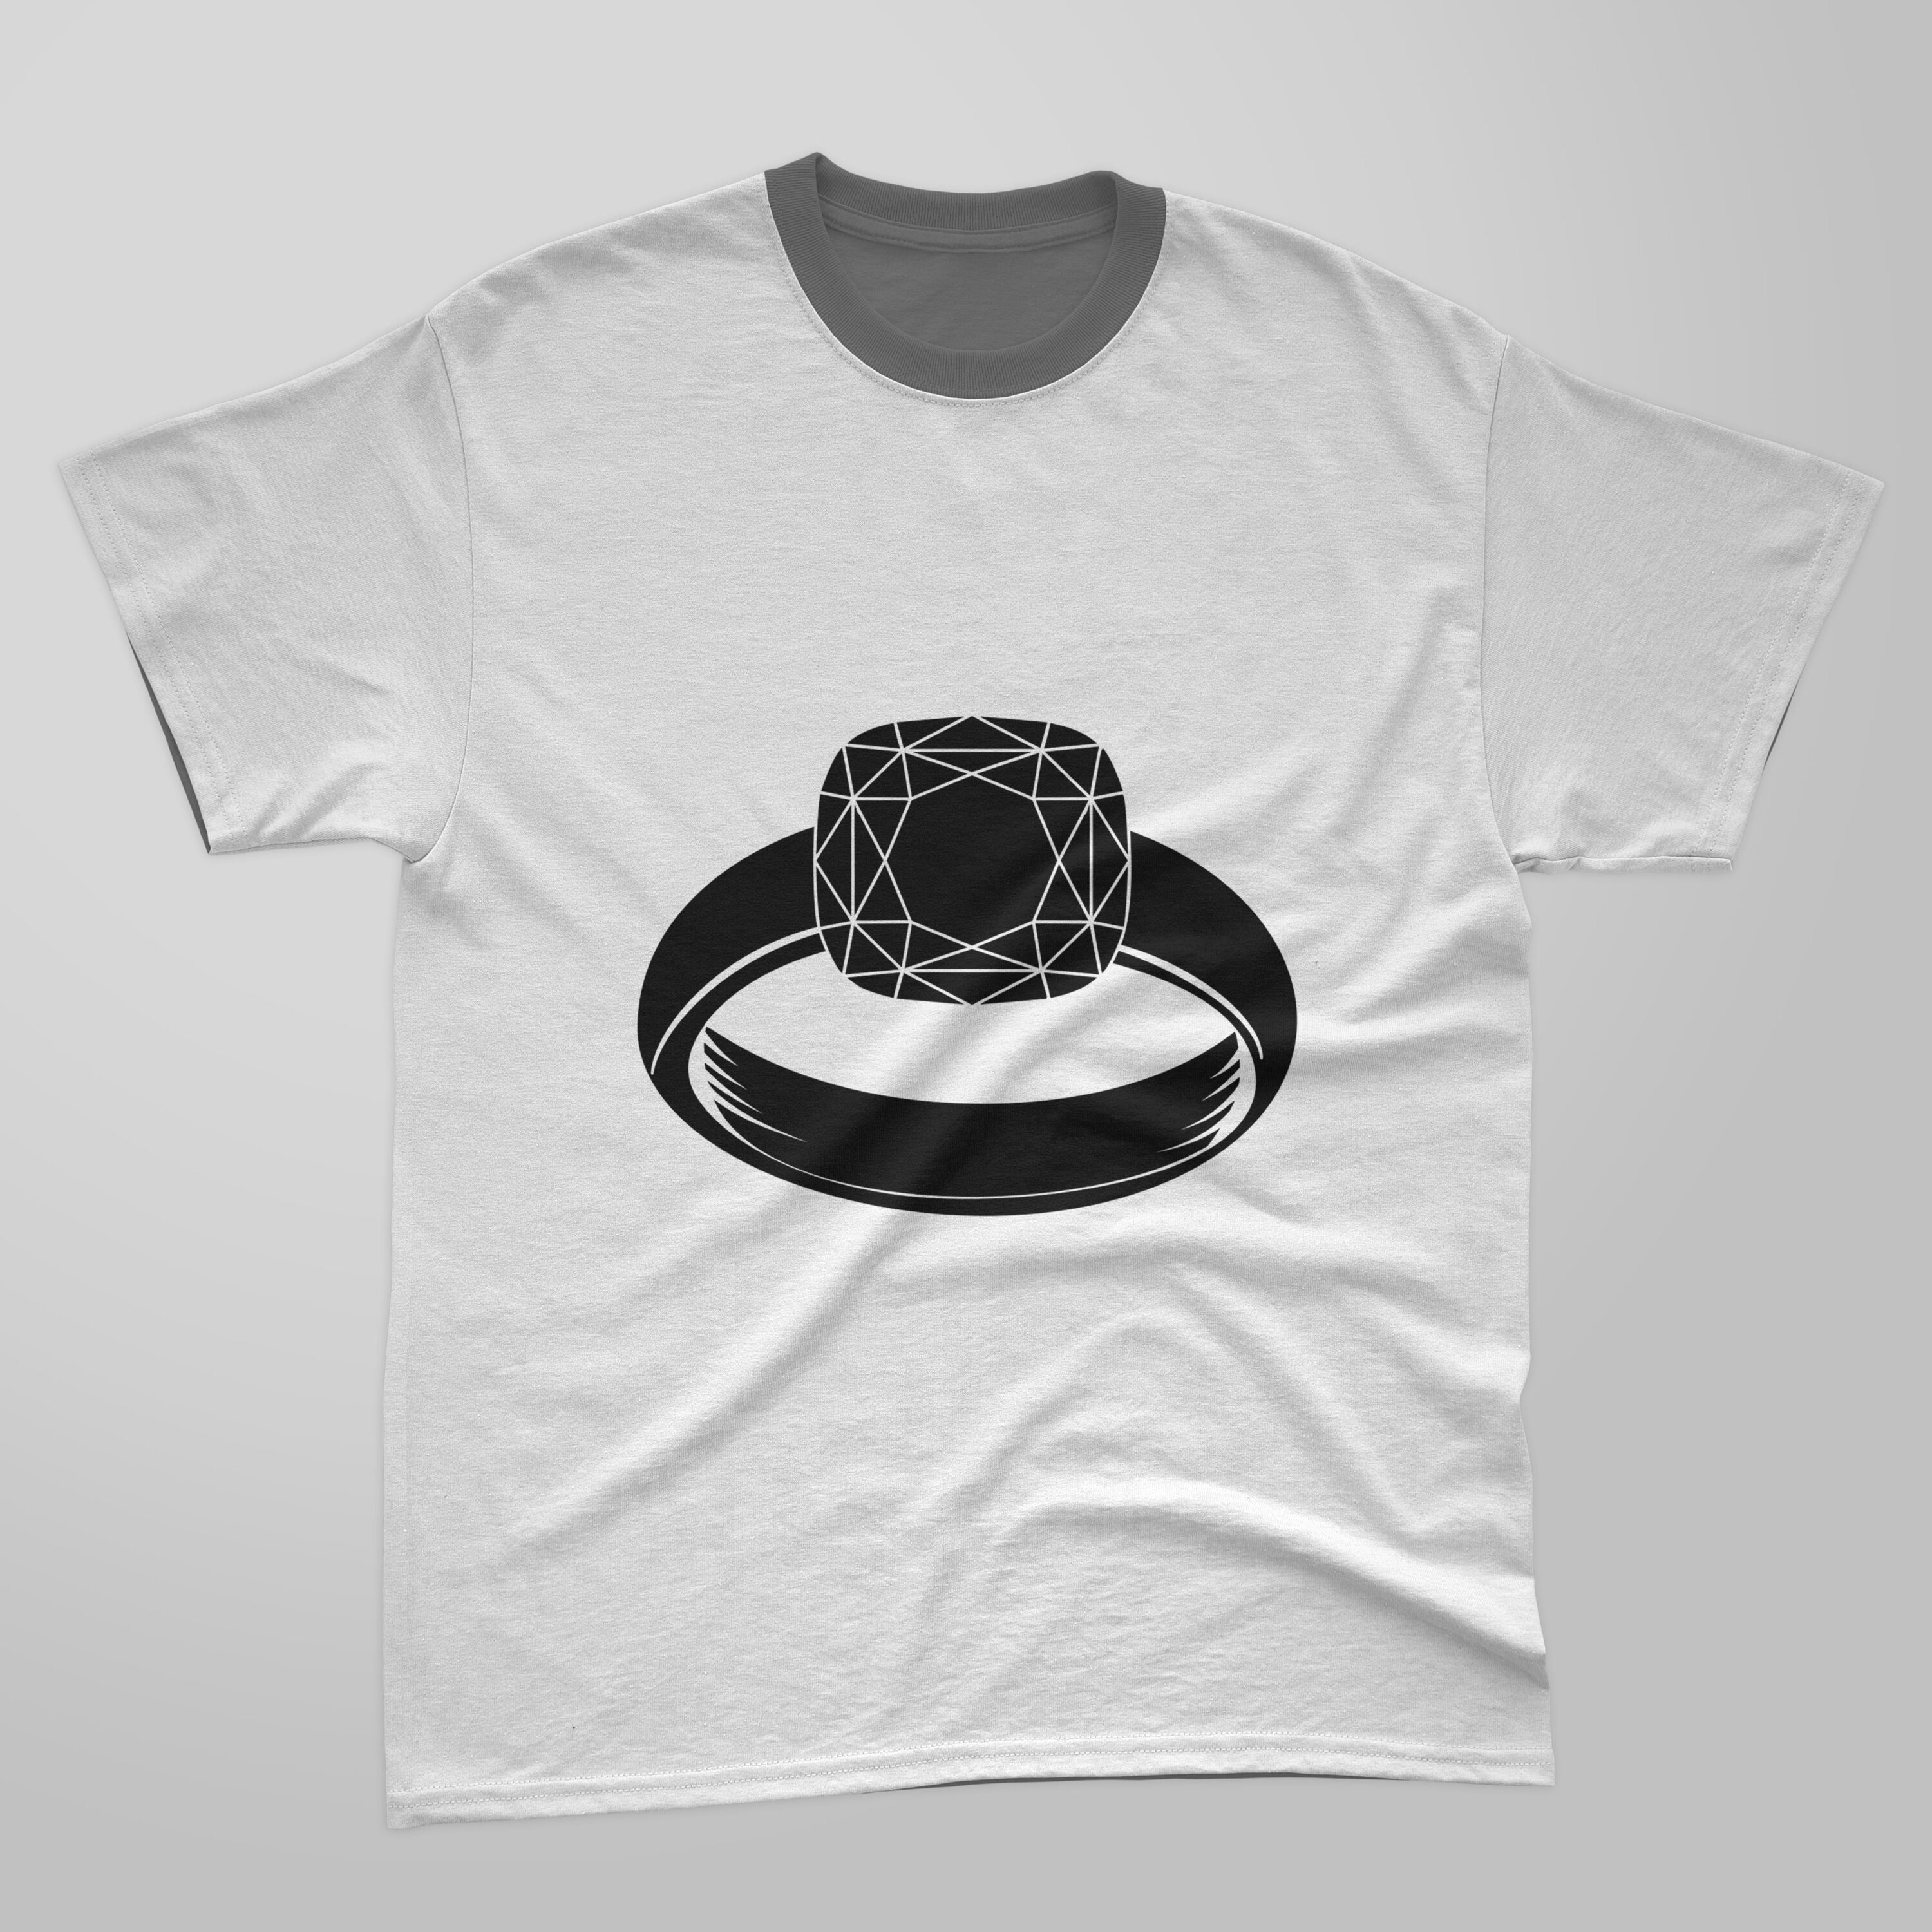 T-shirt image with enchanting print of the silhouette of the diamond ring.